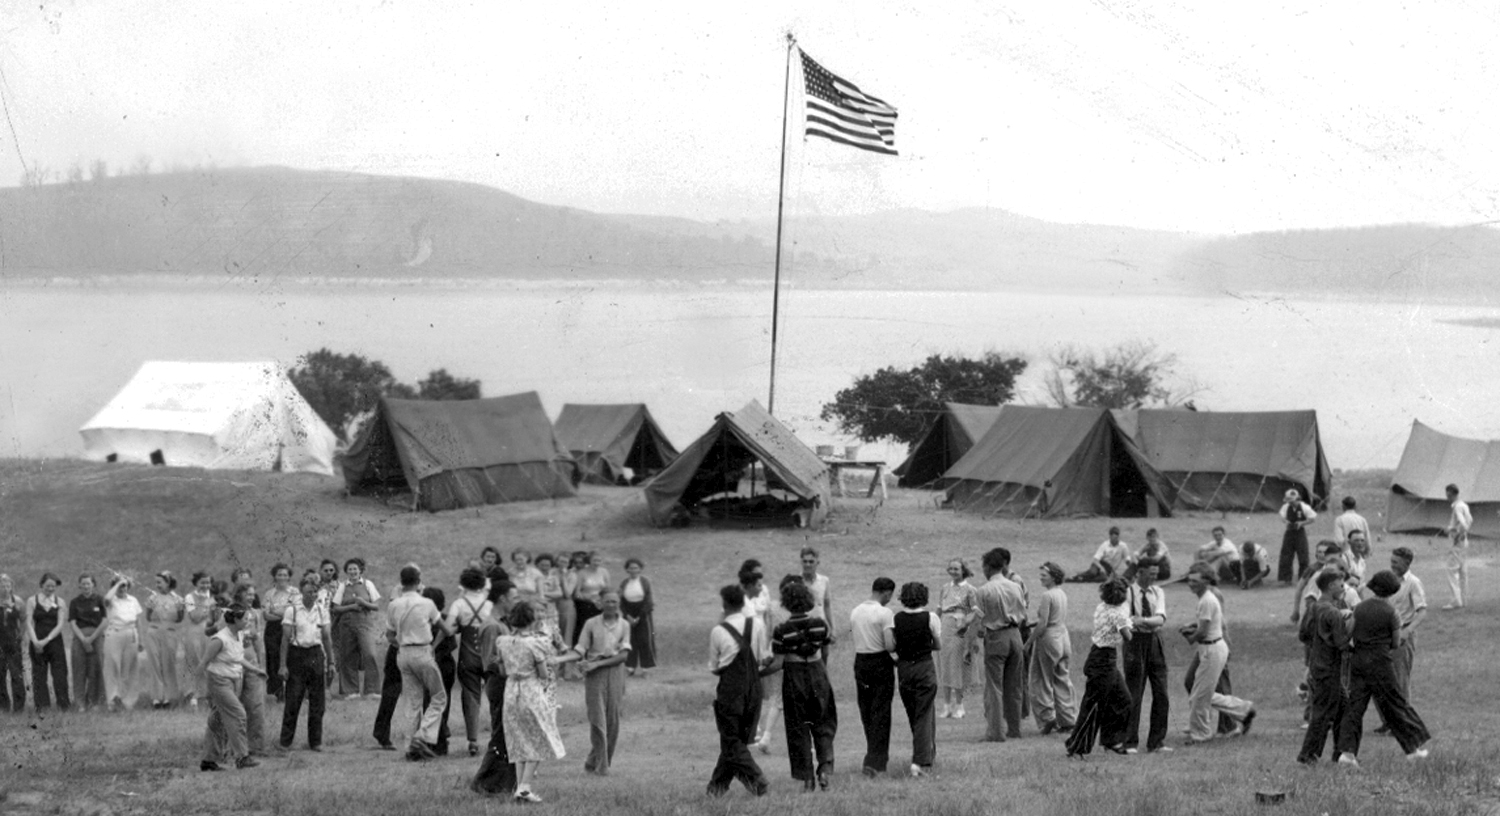 Group of people looking at First Camp Set up